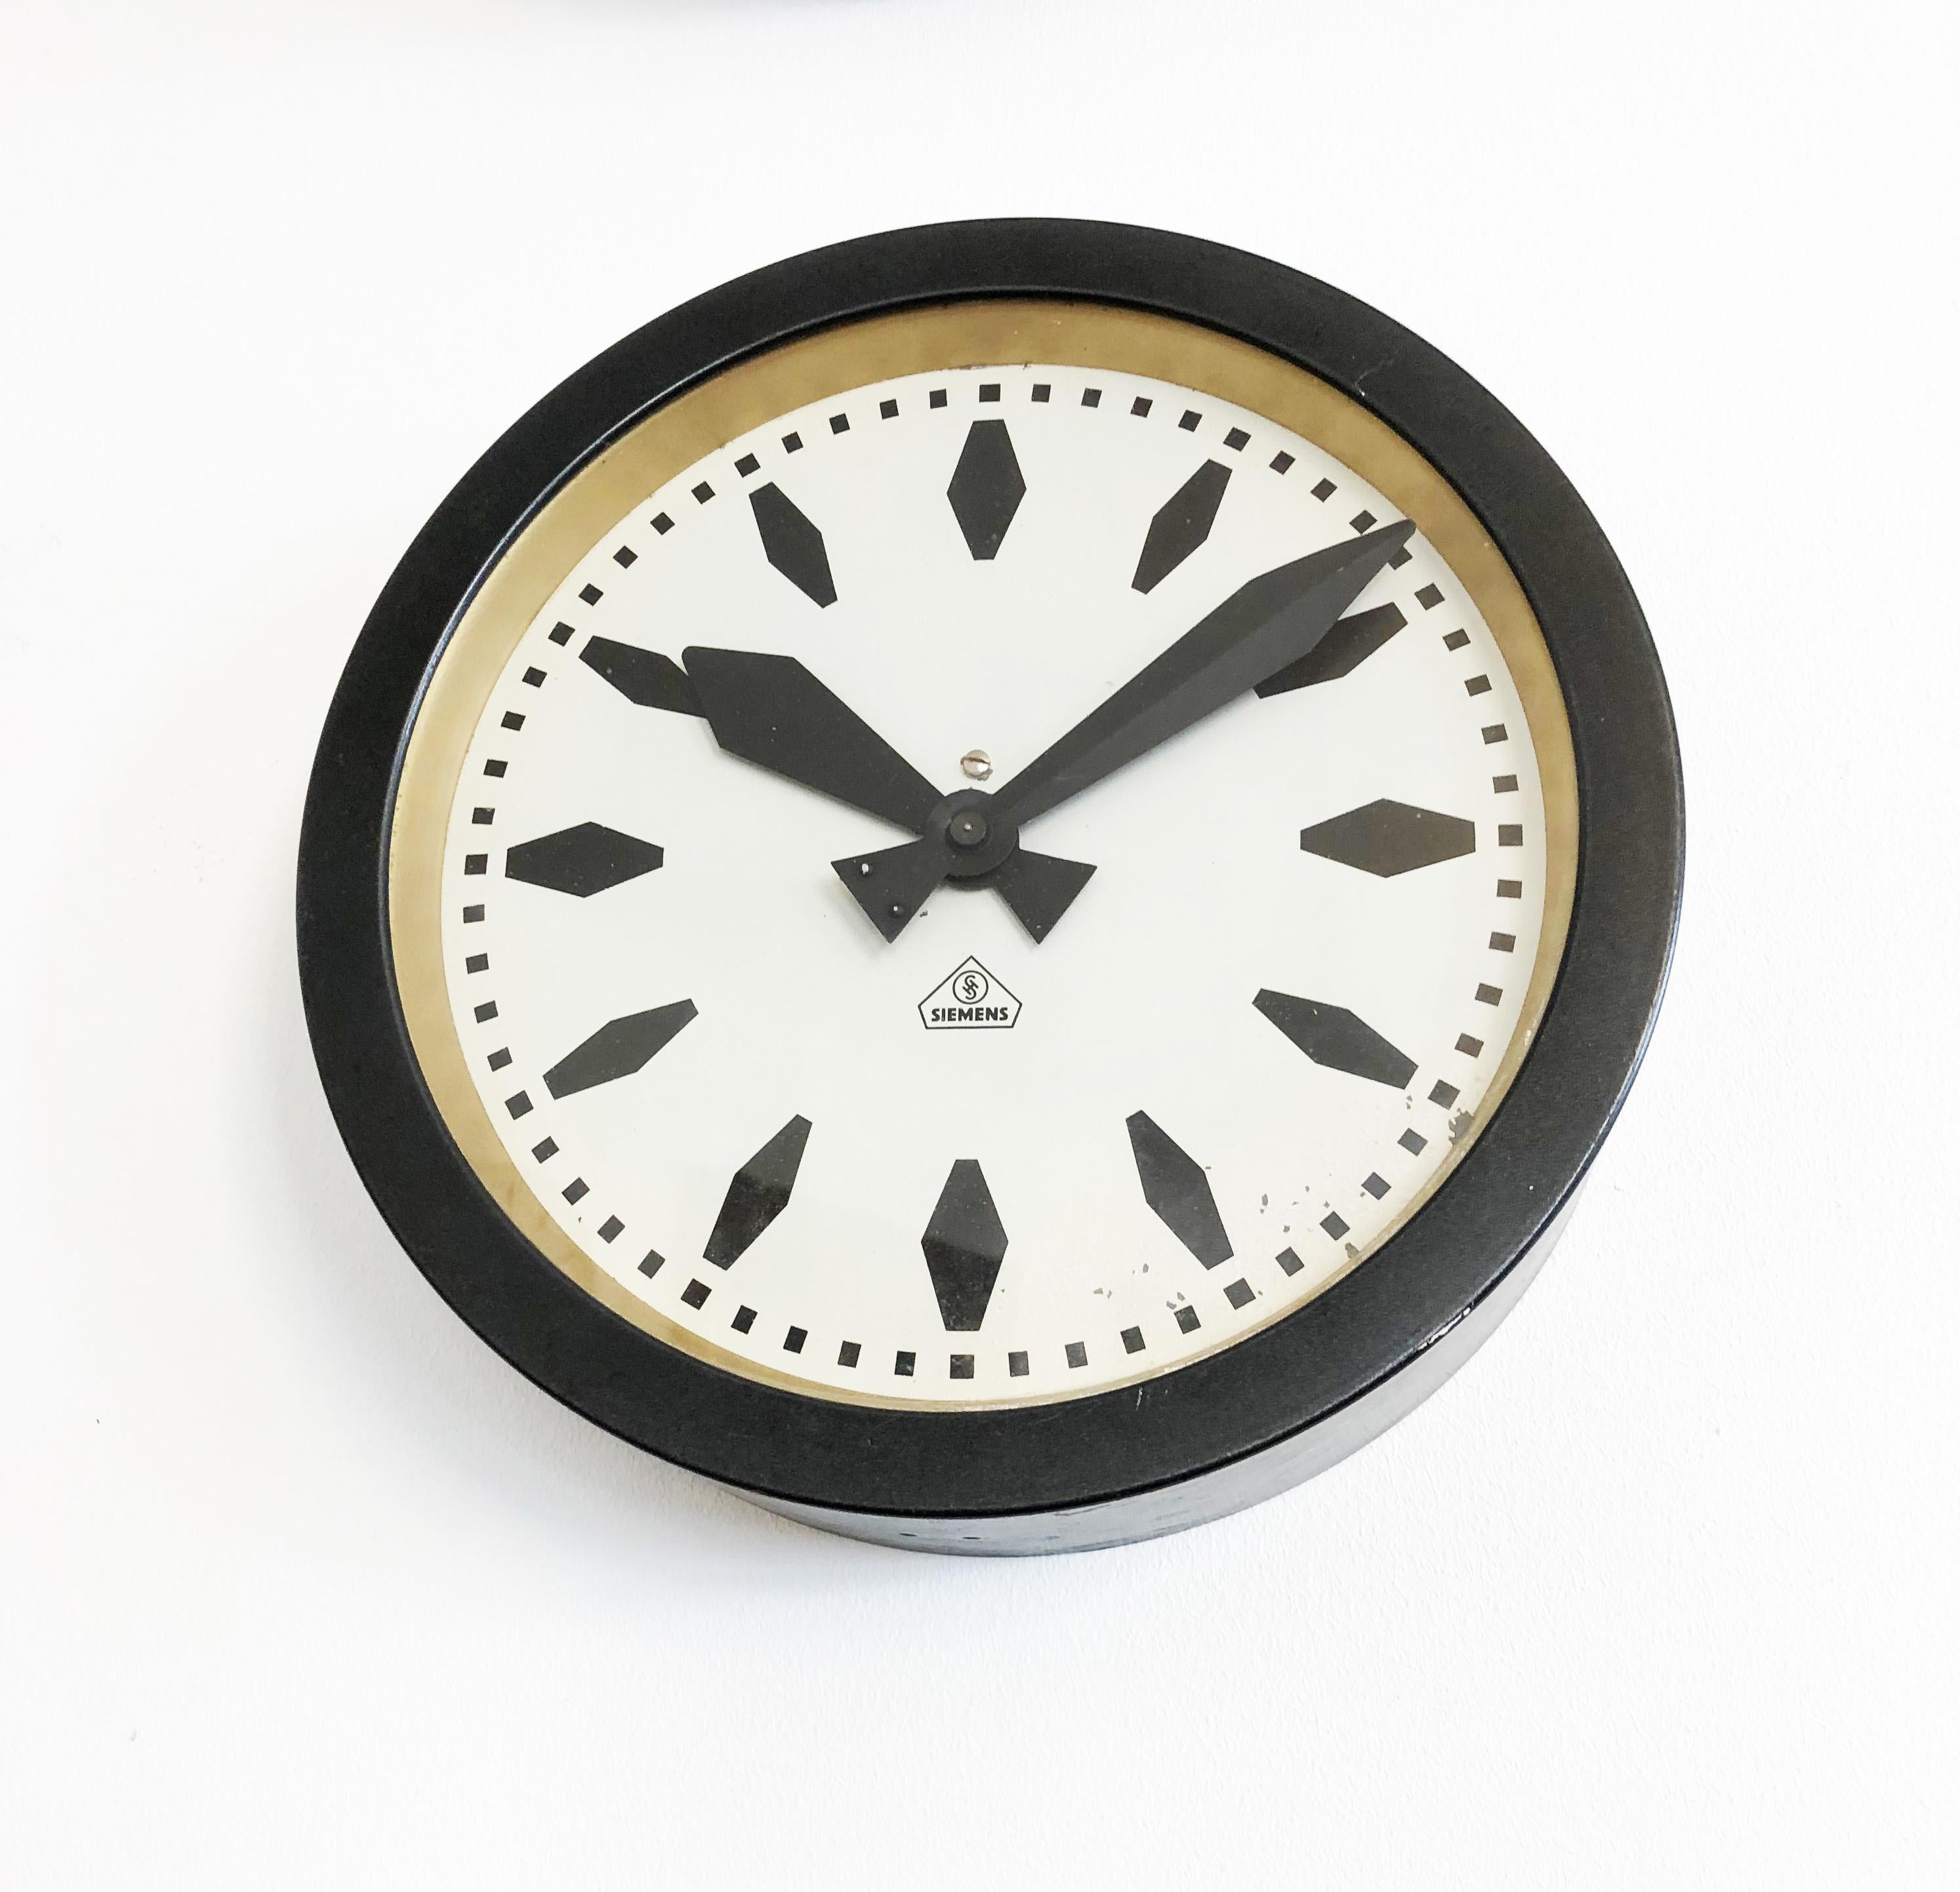 Mid-20th Century Bauhaus Siemens Industrial, Station or Factory Wall Clock